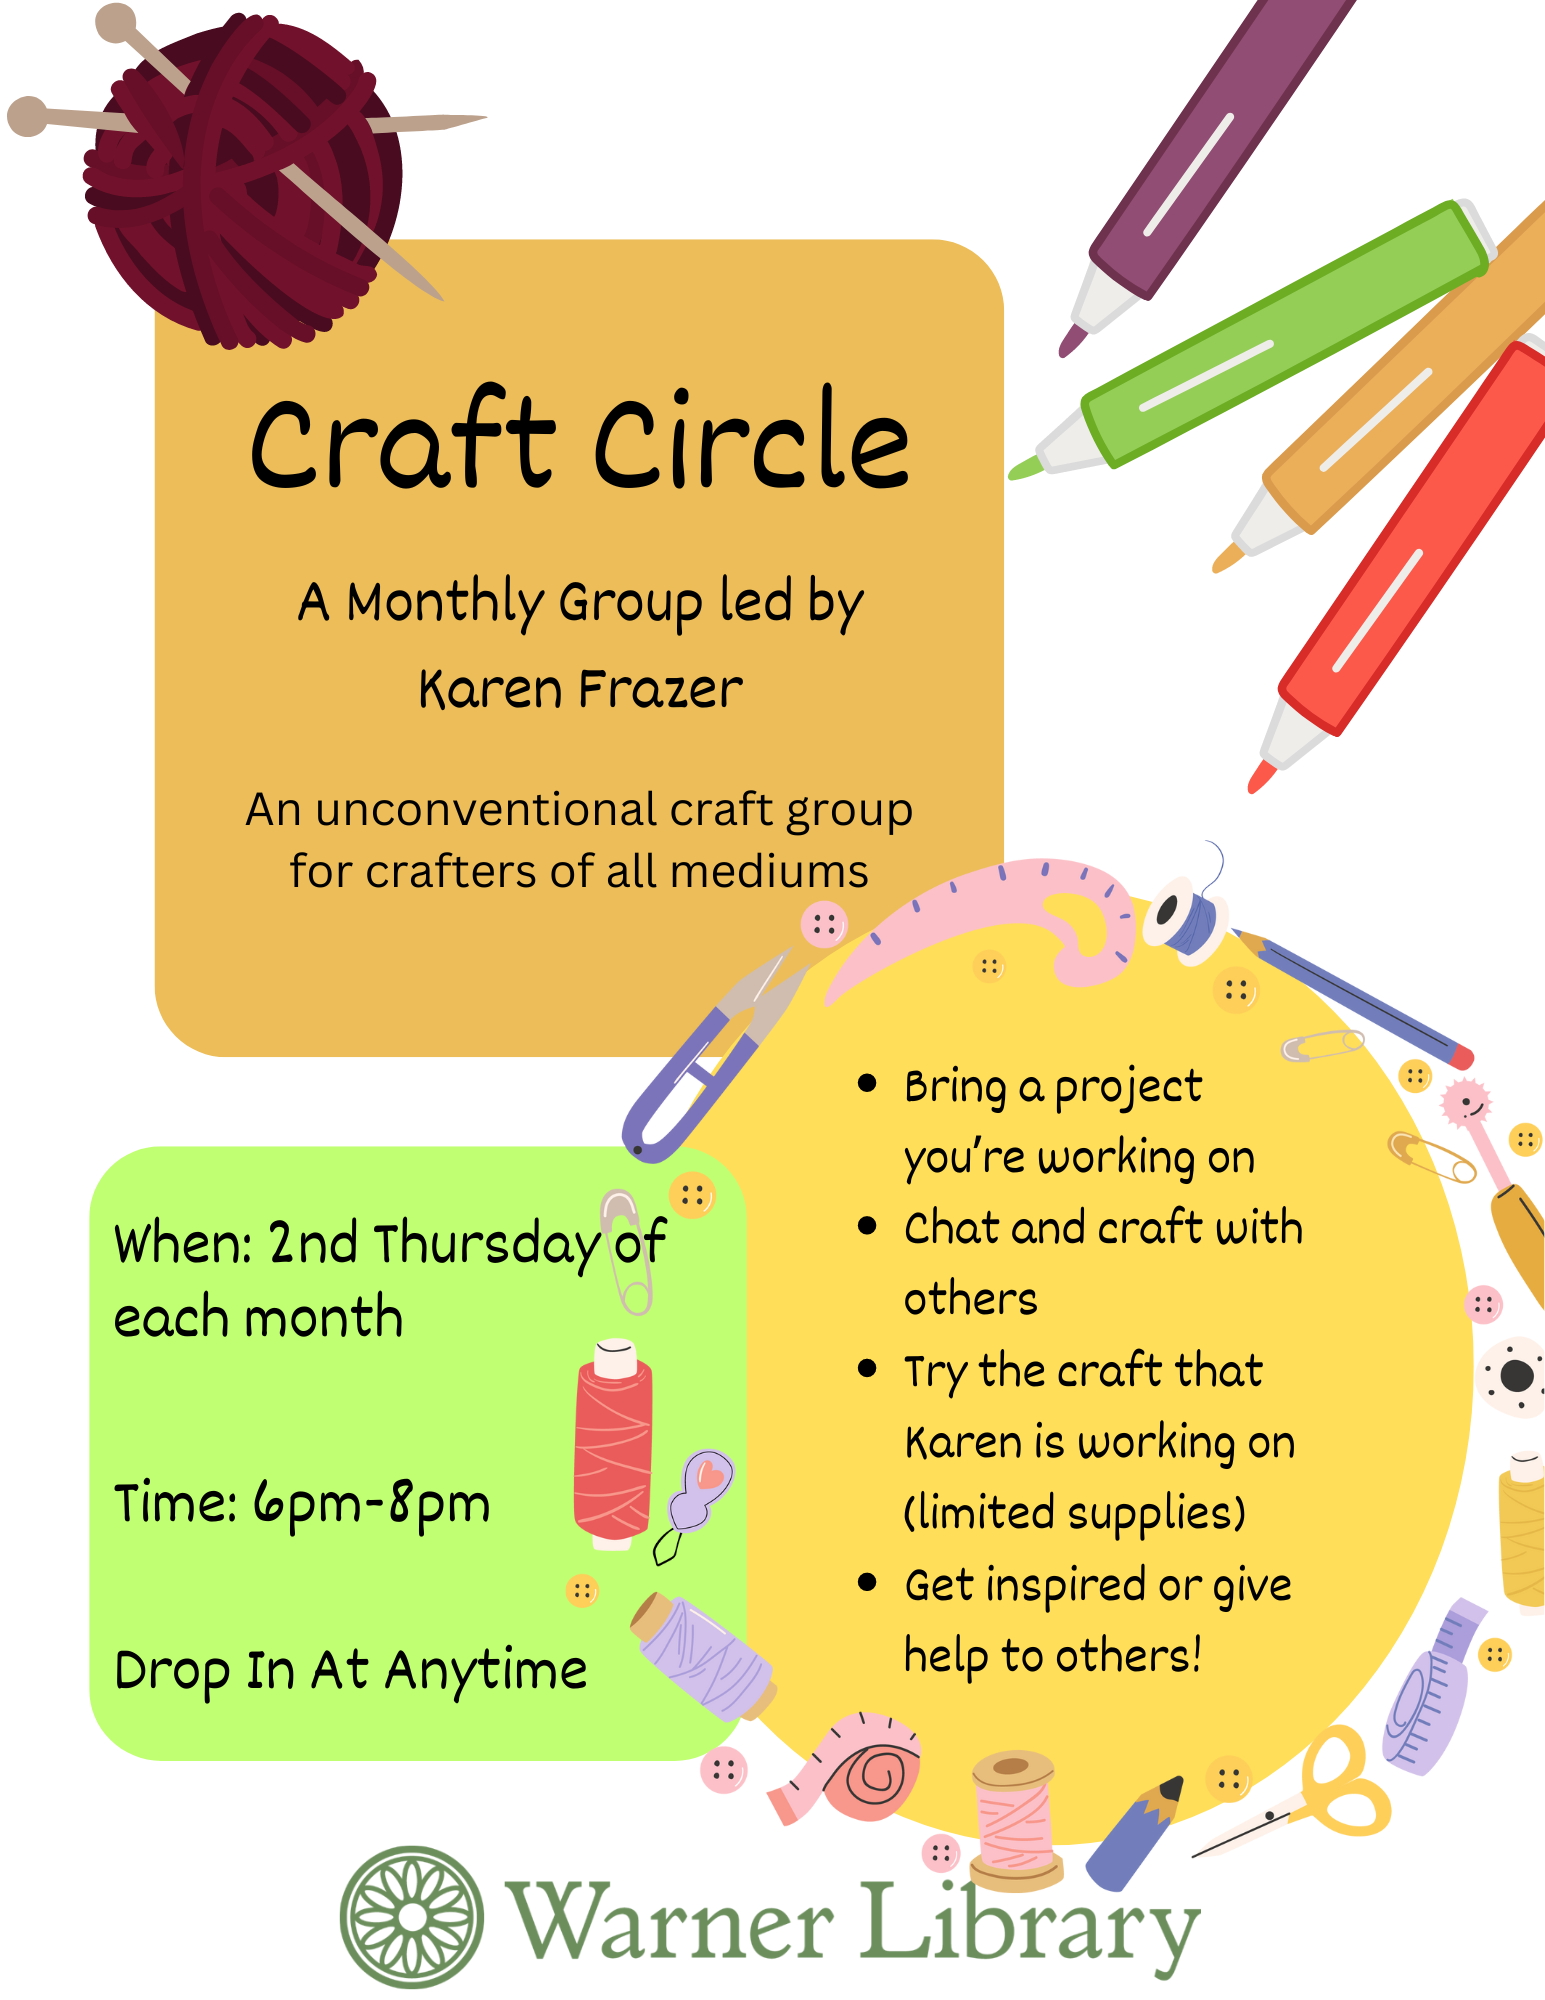 craft circle 2nd Thursday of each month. Bring a craft and chat with others.